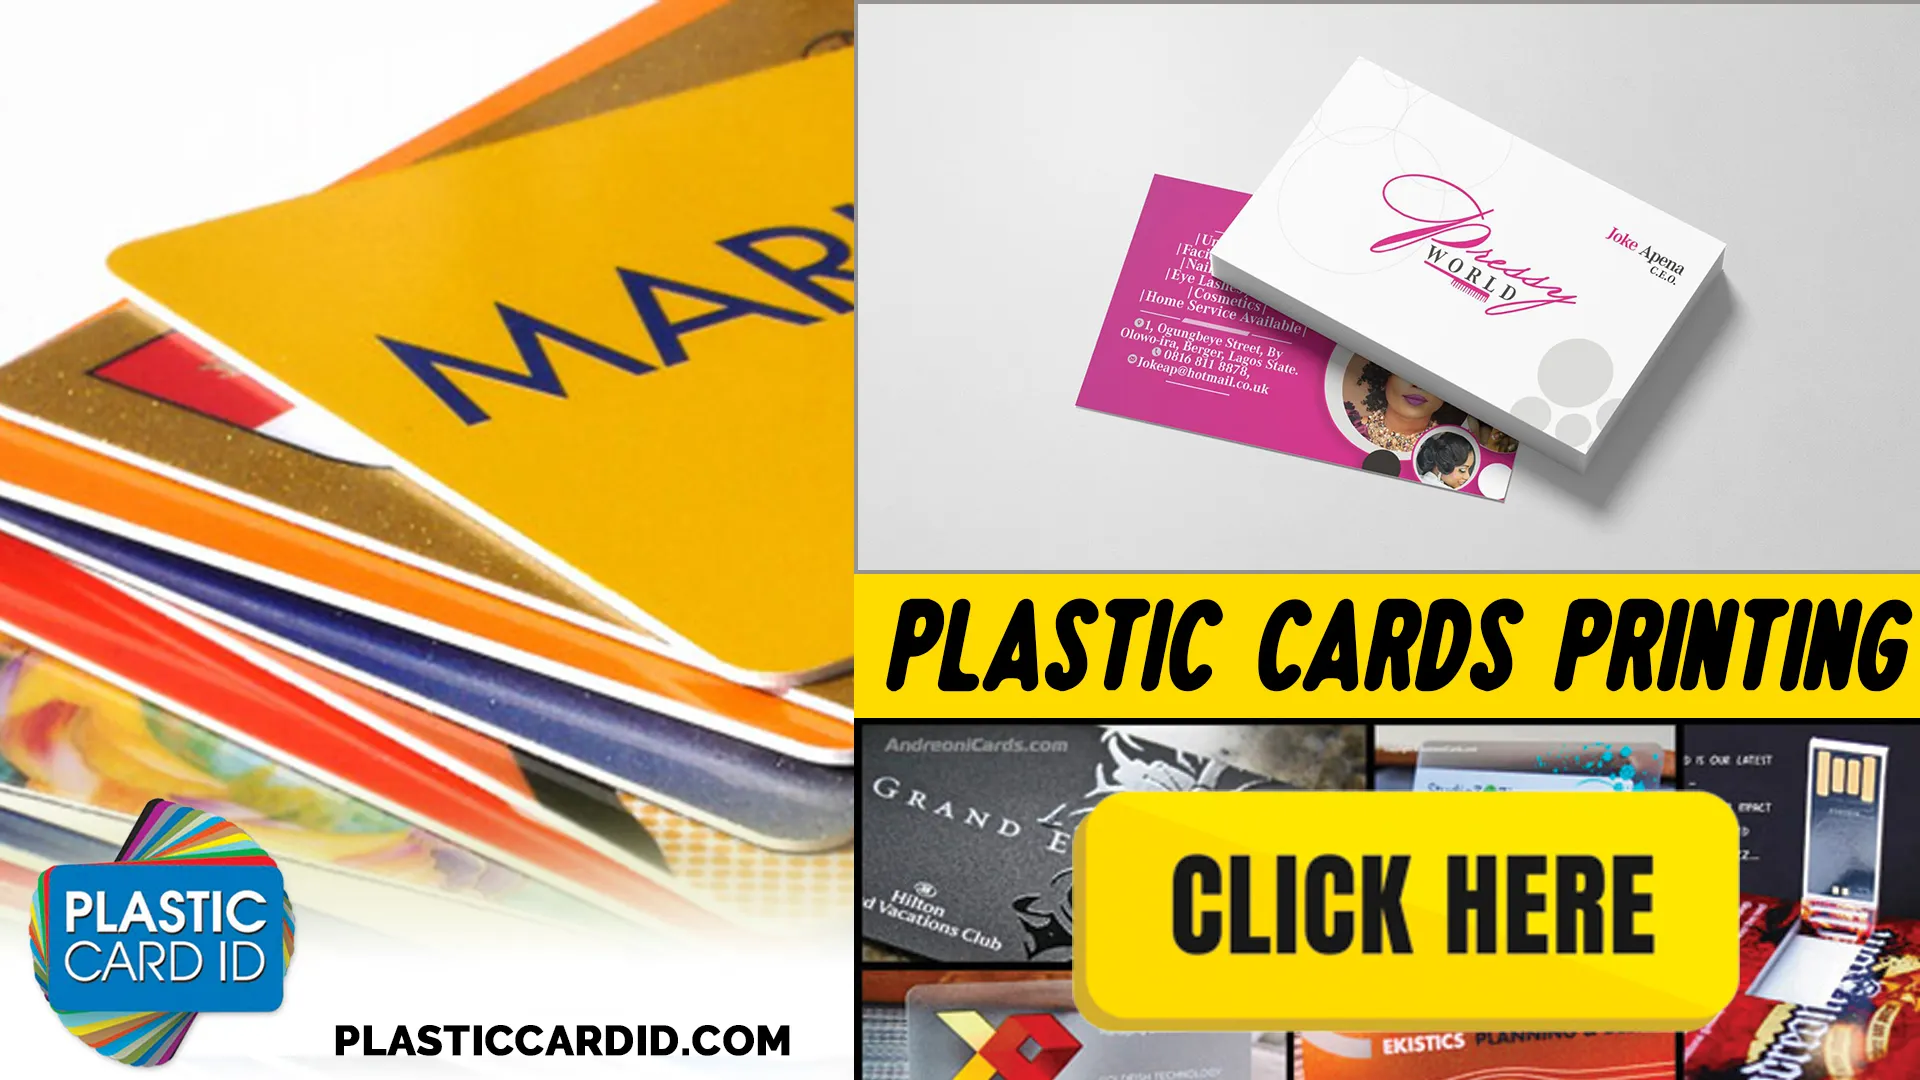 Our Range of Plastic Cards